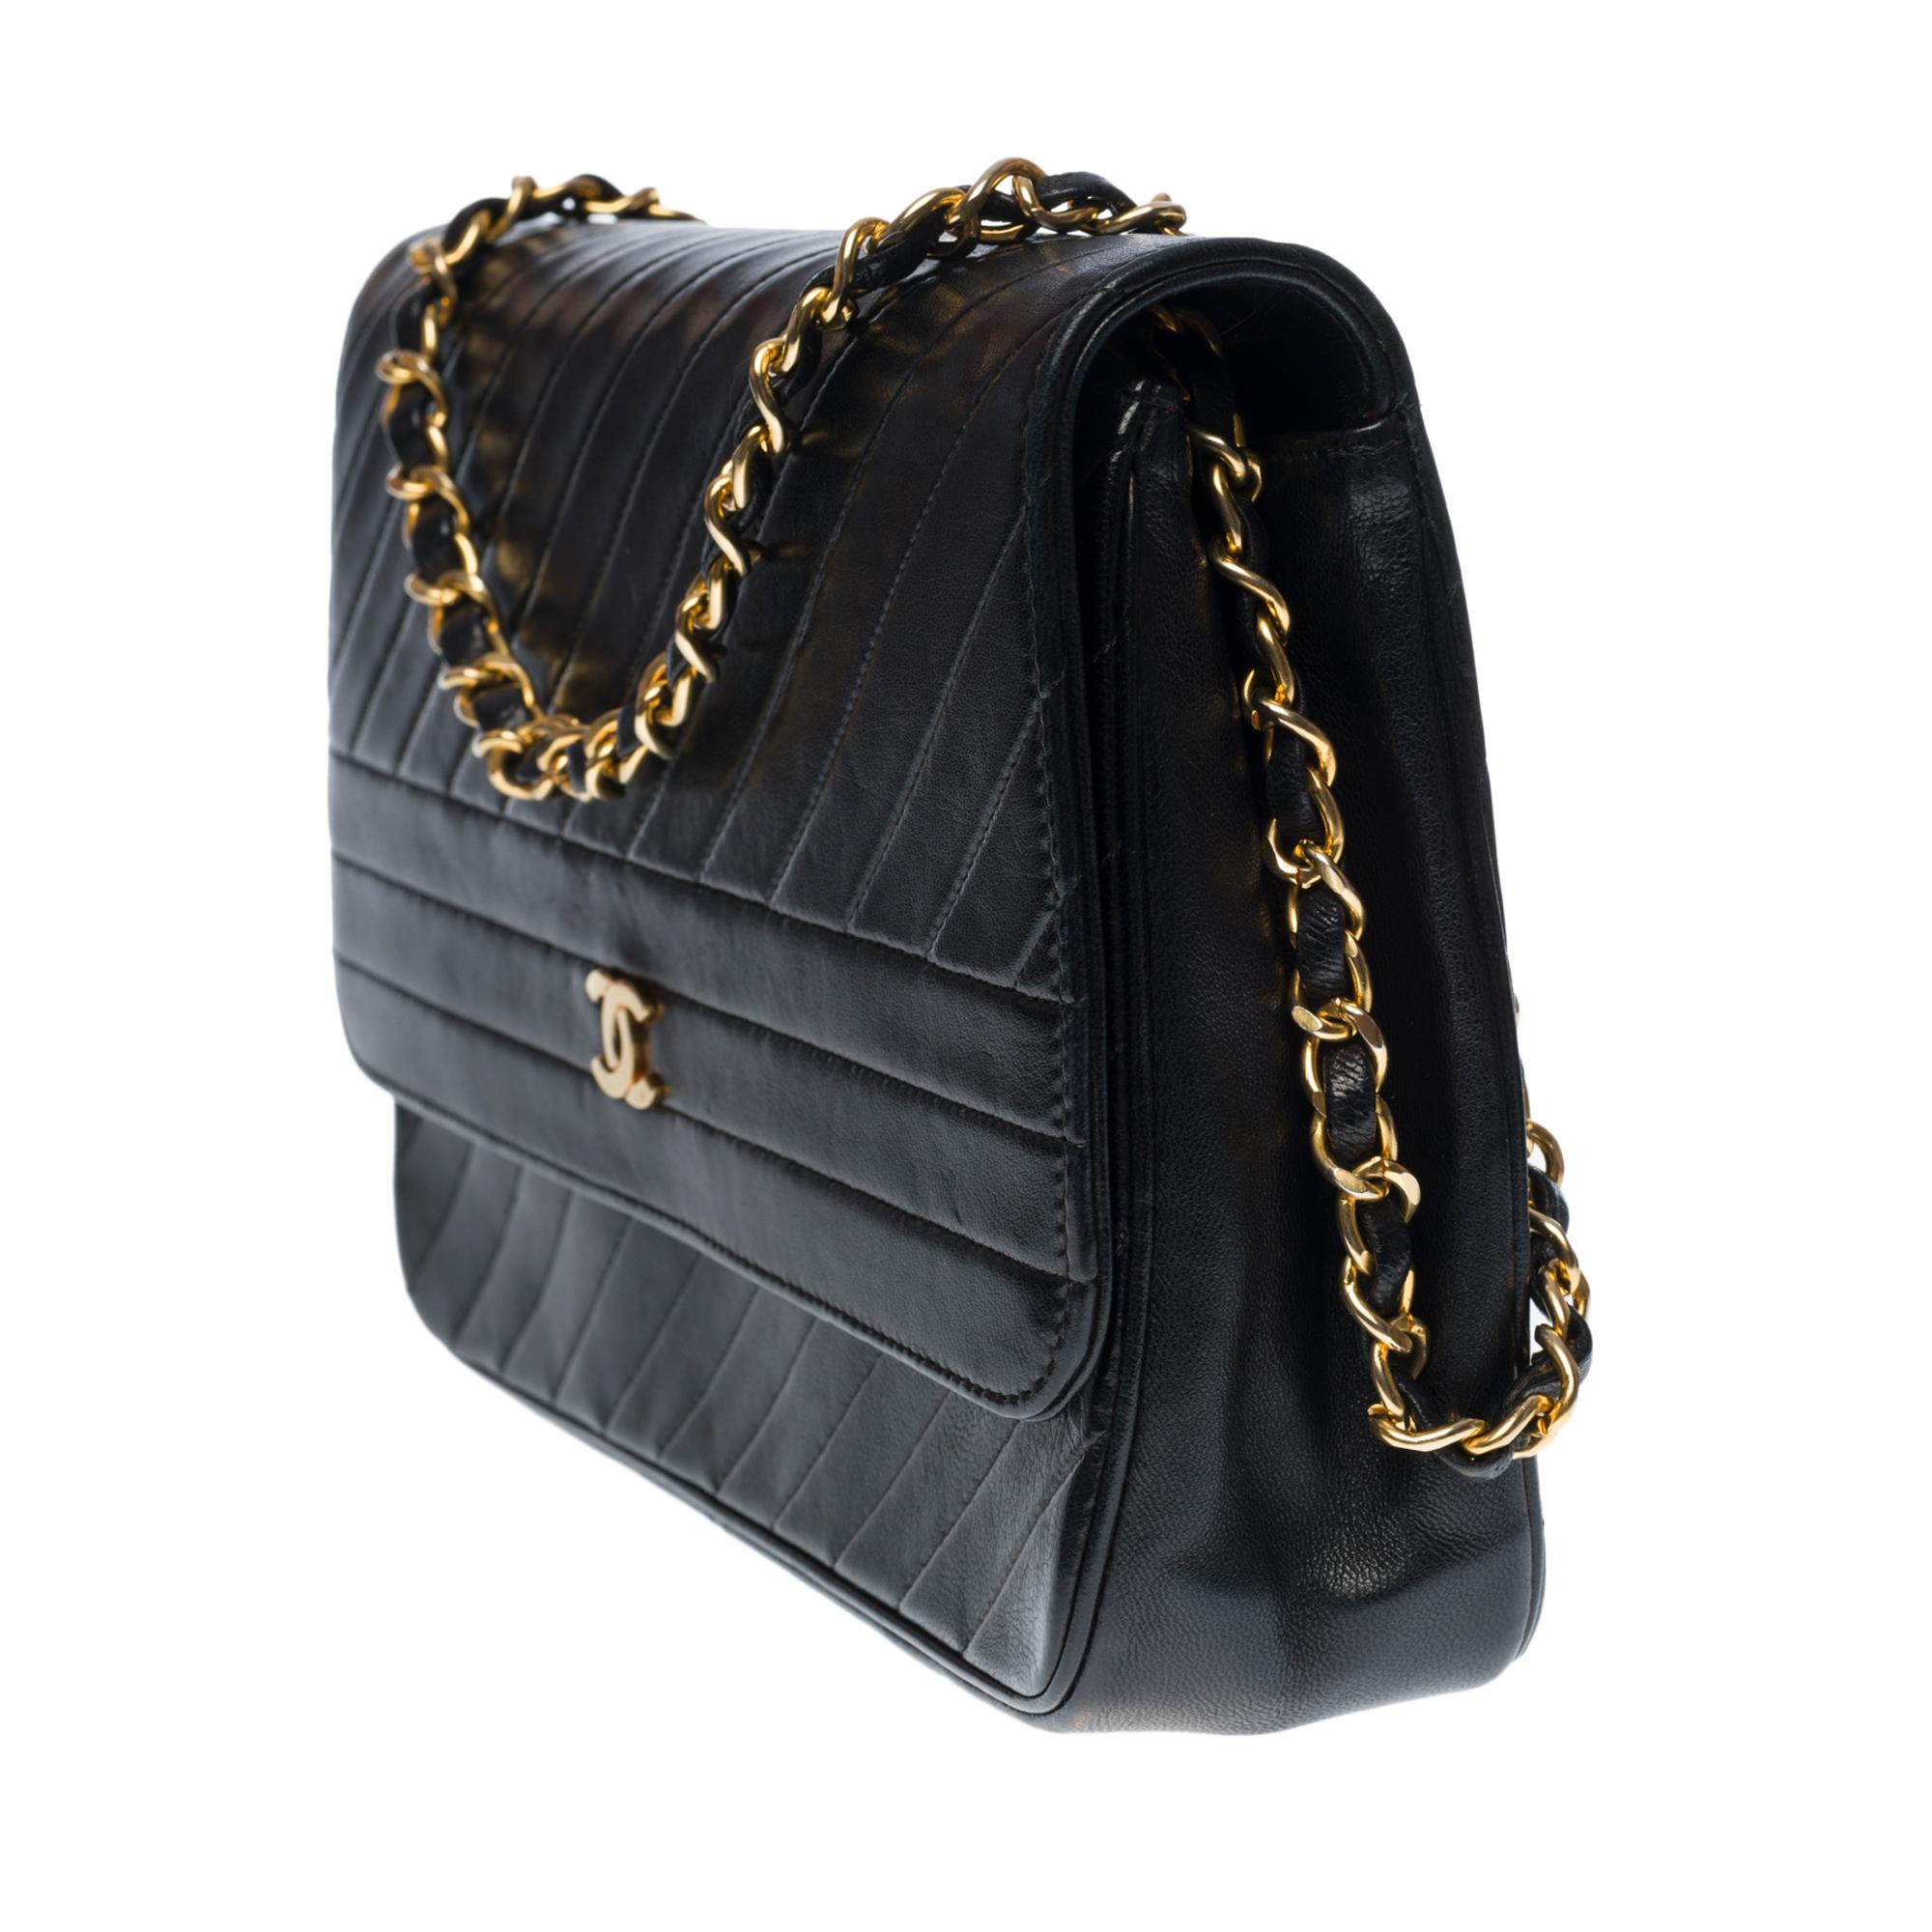 Black Chanel Classic shoulder bag in black quilted leather with herringbone , GHW